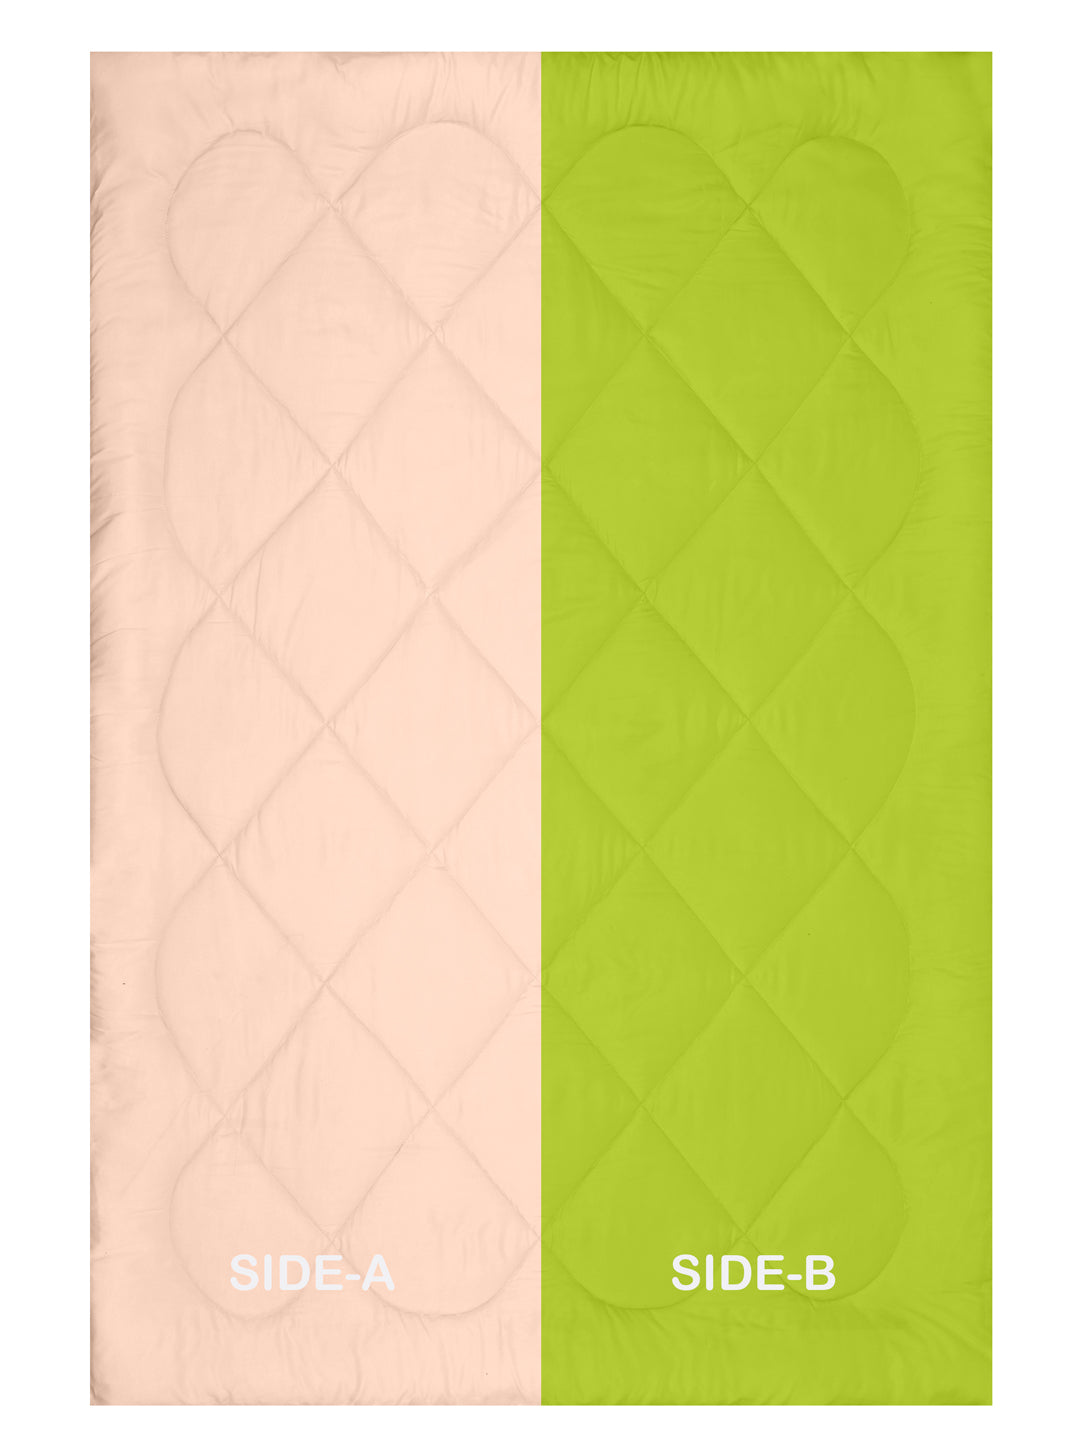 Reversible Single Bed Comforter 200 GSM 60x90 Inches (Peach & Green)